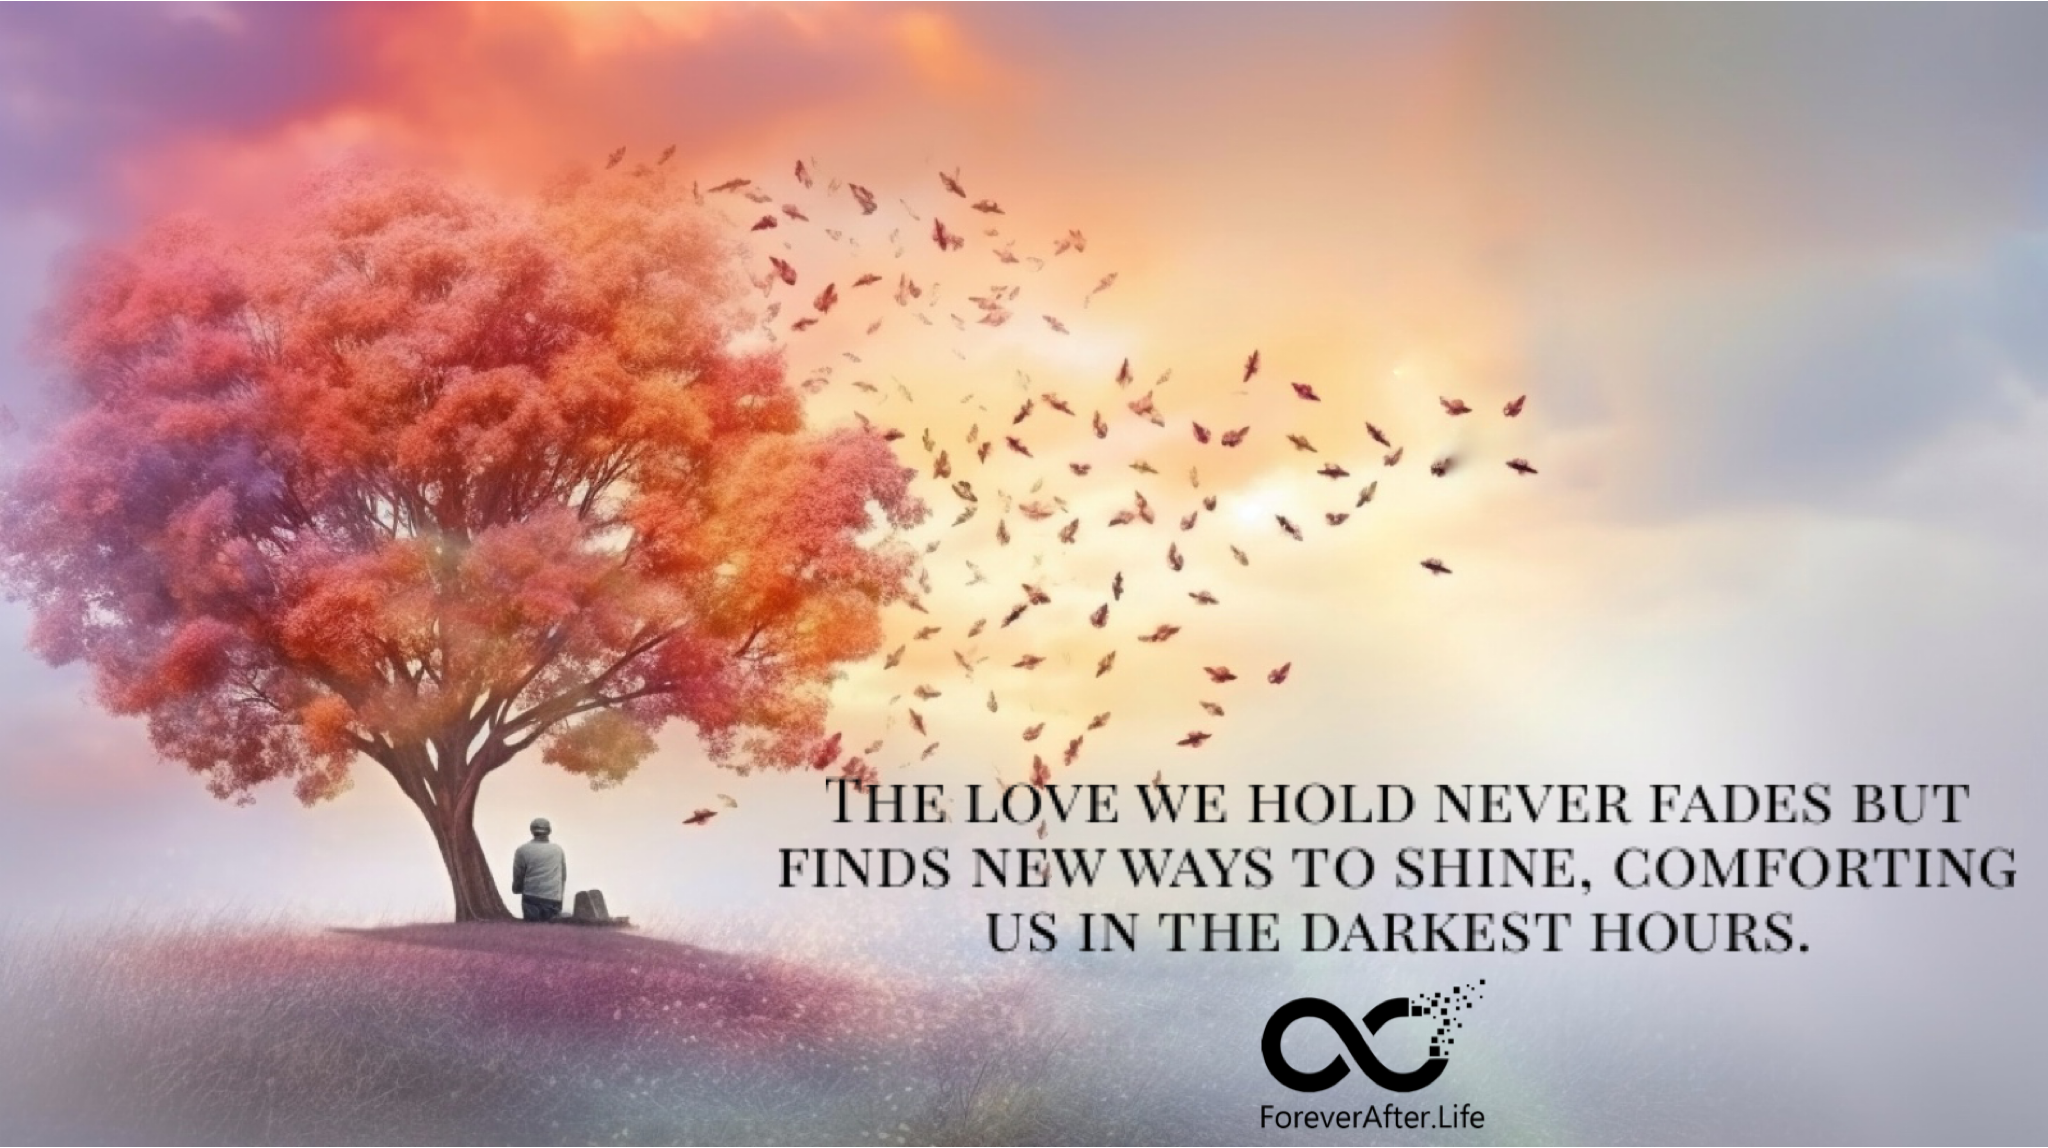 The love we hold never fades but finds new ways to shine, comforting us in the darkest hours.